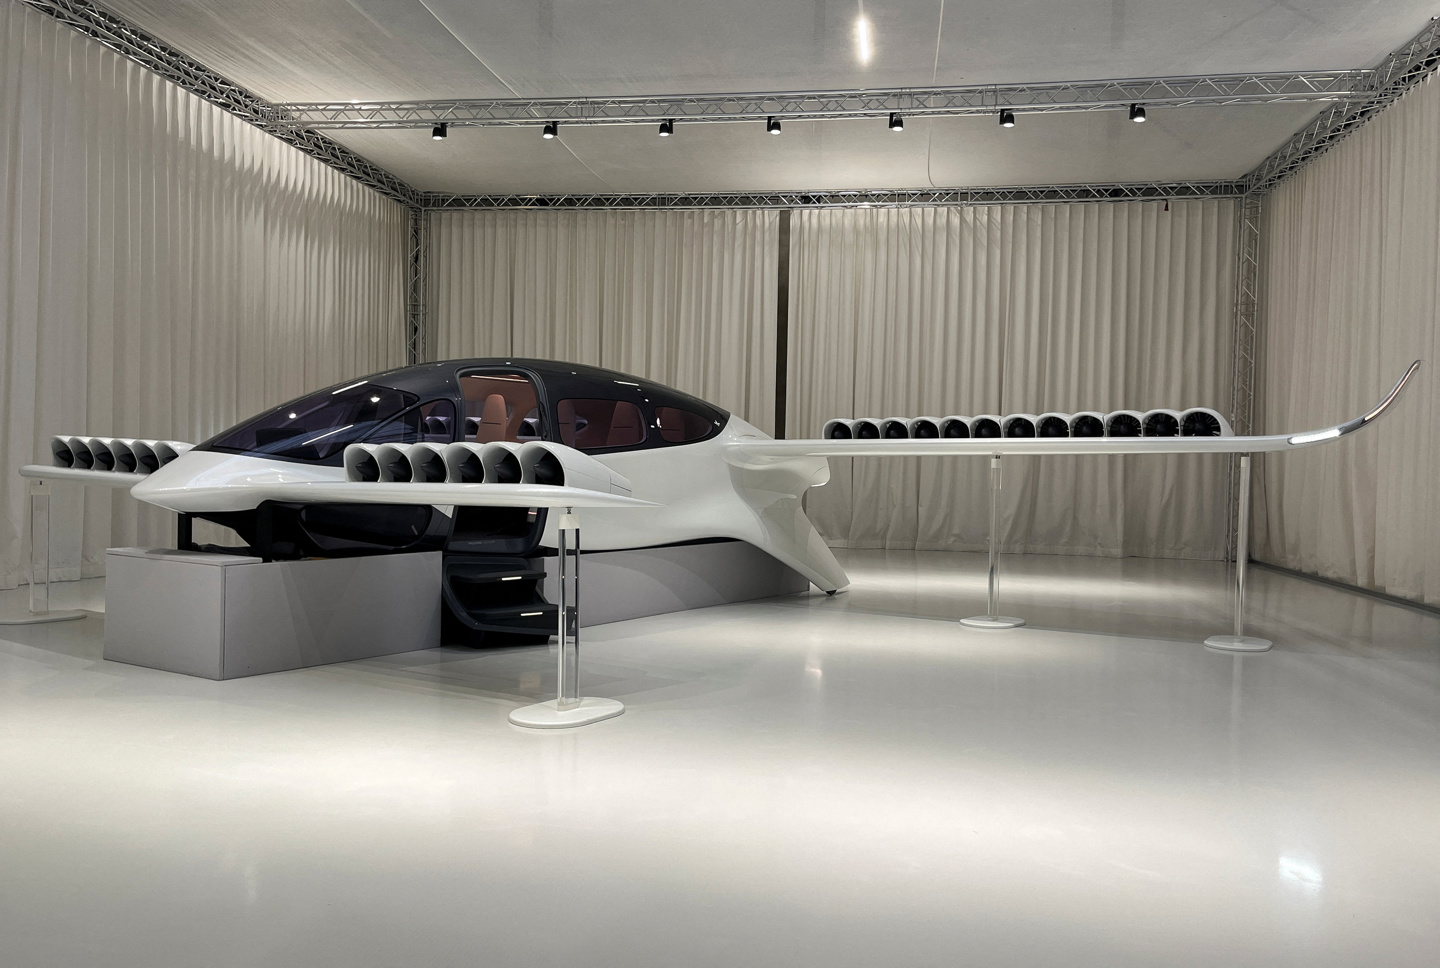 Full-size mock-up of an electrically powered Lilium Jet air taxi presentation